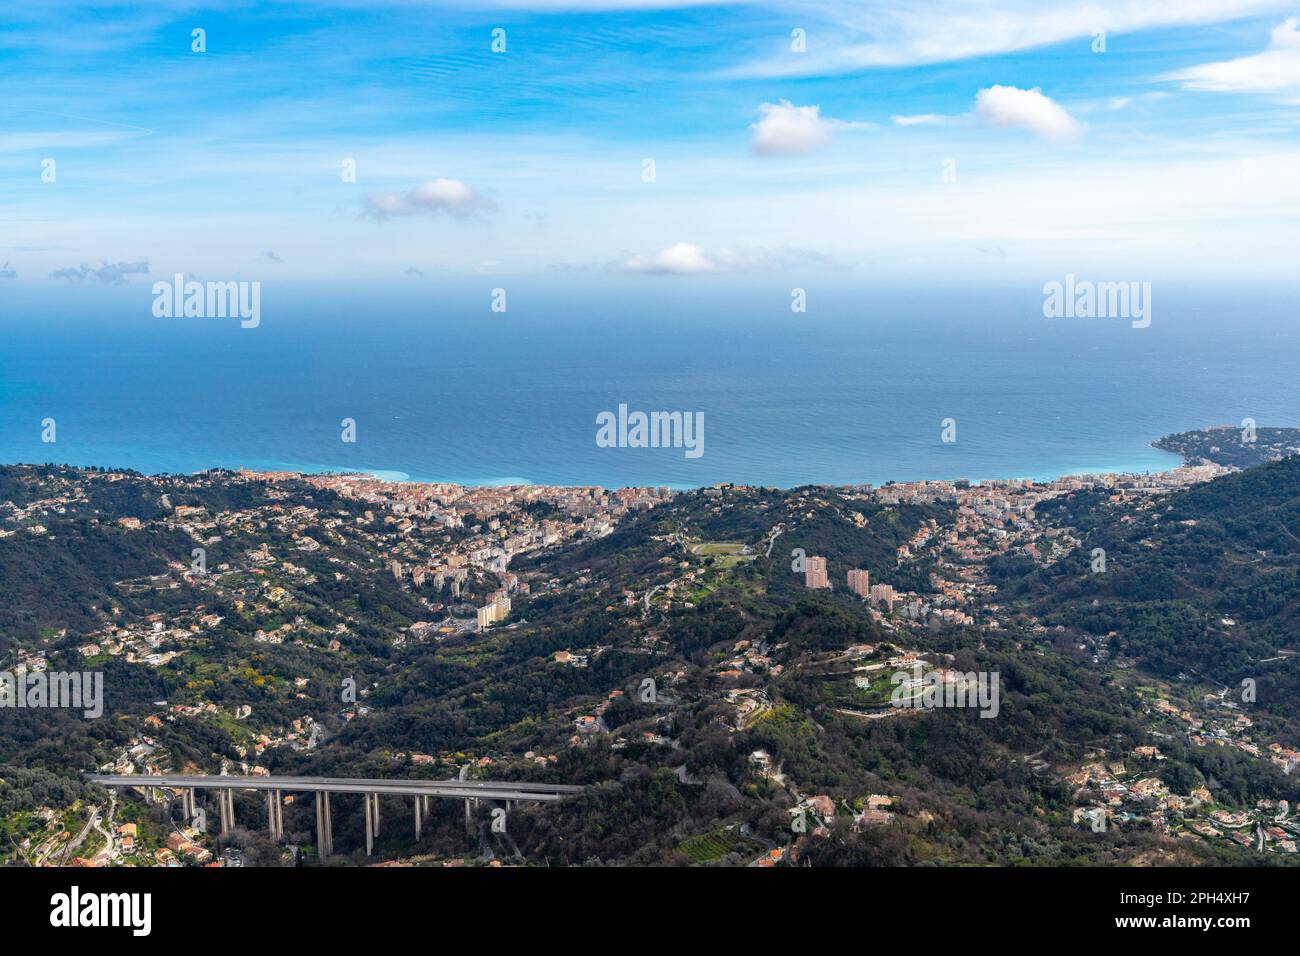 Landscape view of the Mediterranean Coast and the towns of Menton and Cape Martin in southern France with the La Provencal Highway Stock Photo